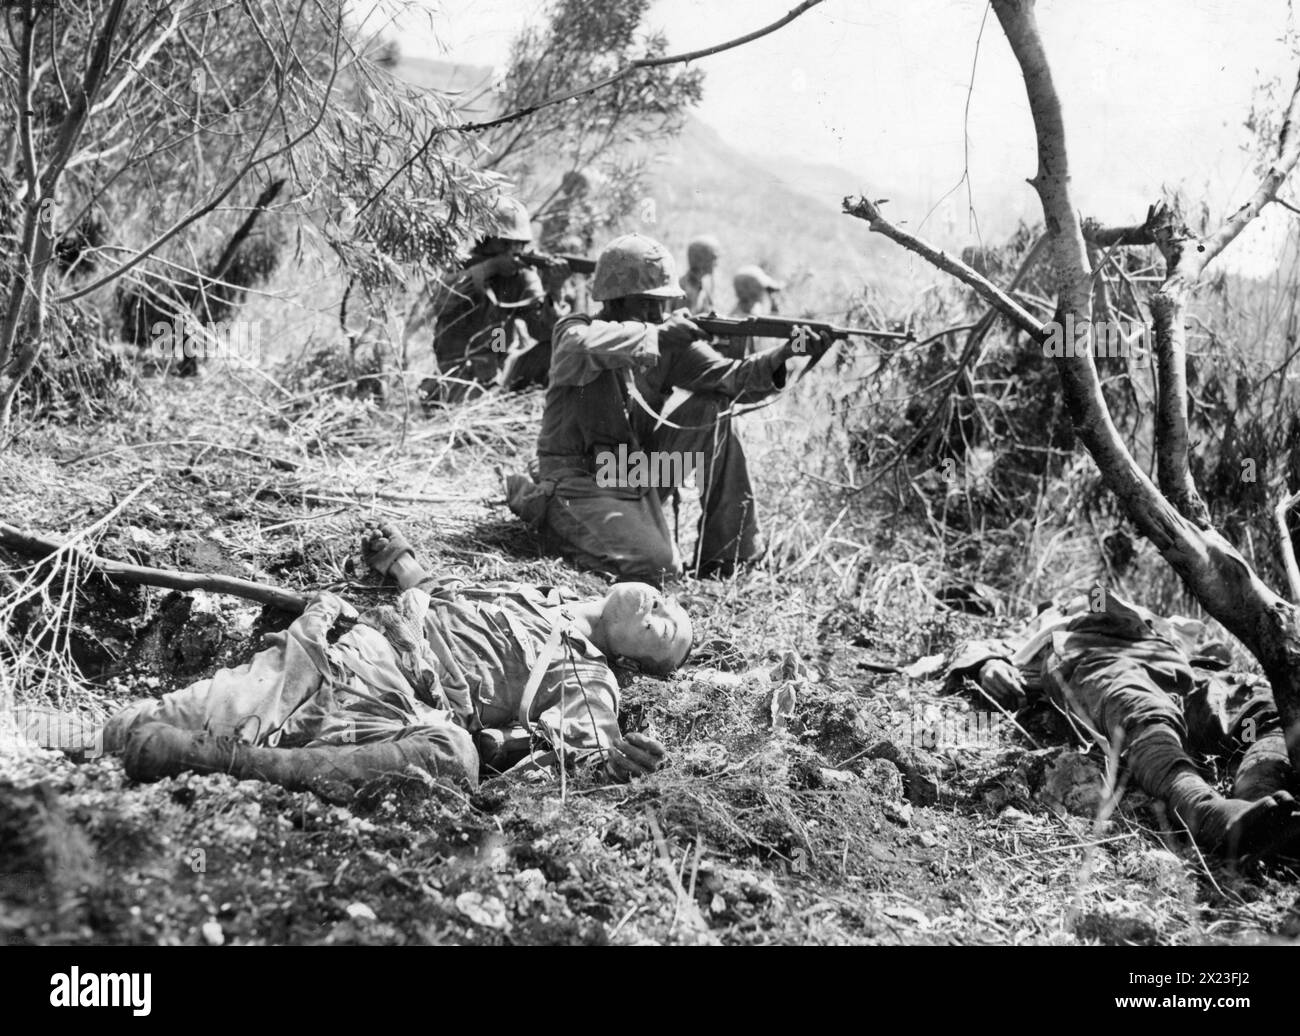 July 24, 1944, Saipan - U.S. Marines on Saipan fire at the enemy beside the bodies of Japanese dead as the Marines advance toward the western beach of the island near Mount Merpi.  By July 9, one day after Japanese resistance ended, Americans had buried more than 11,000 Japanese dead. Stock Photo